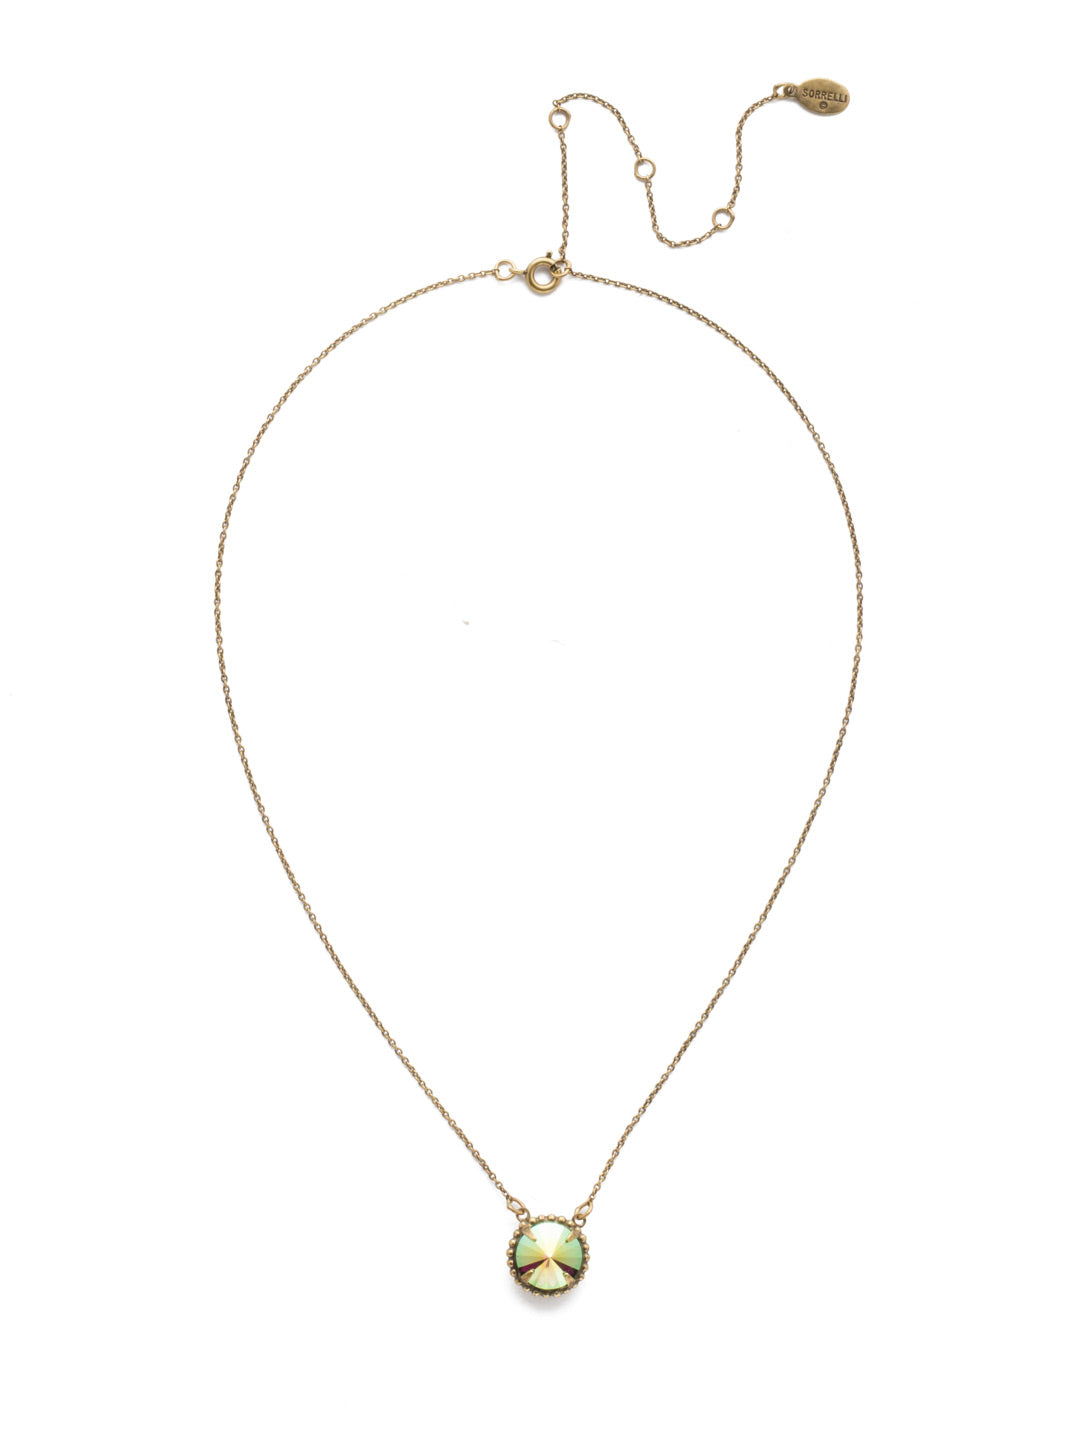 Soleil Pendant Necklace - NEF48AGGOT - You'll definitely take a shine to this brilliant pendant necklace, this perfect piece is sure to be the center of attention in your own unique look. From Sorrelli's Game of Jewel Tones collection in our Antique Gold-tone finish.